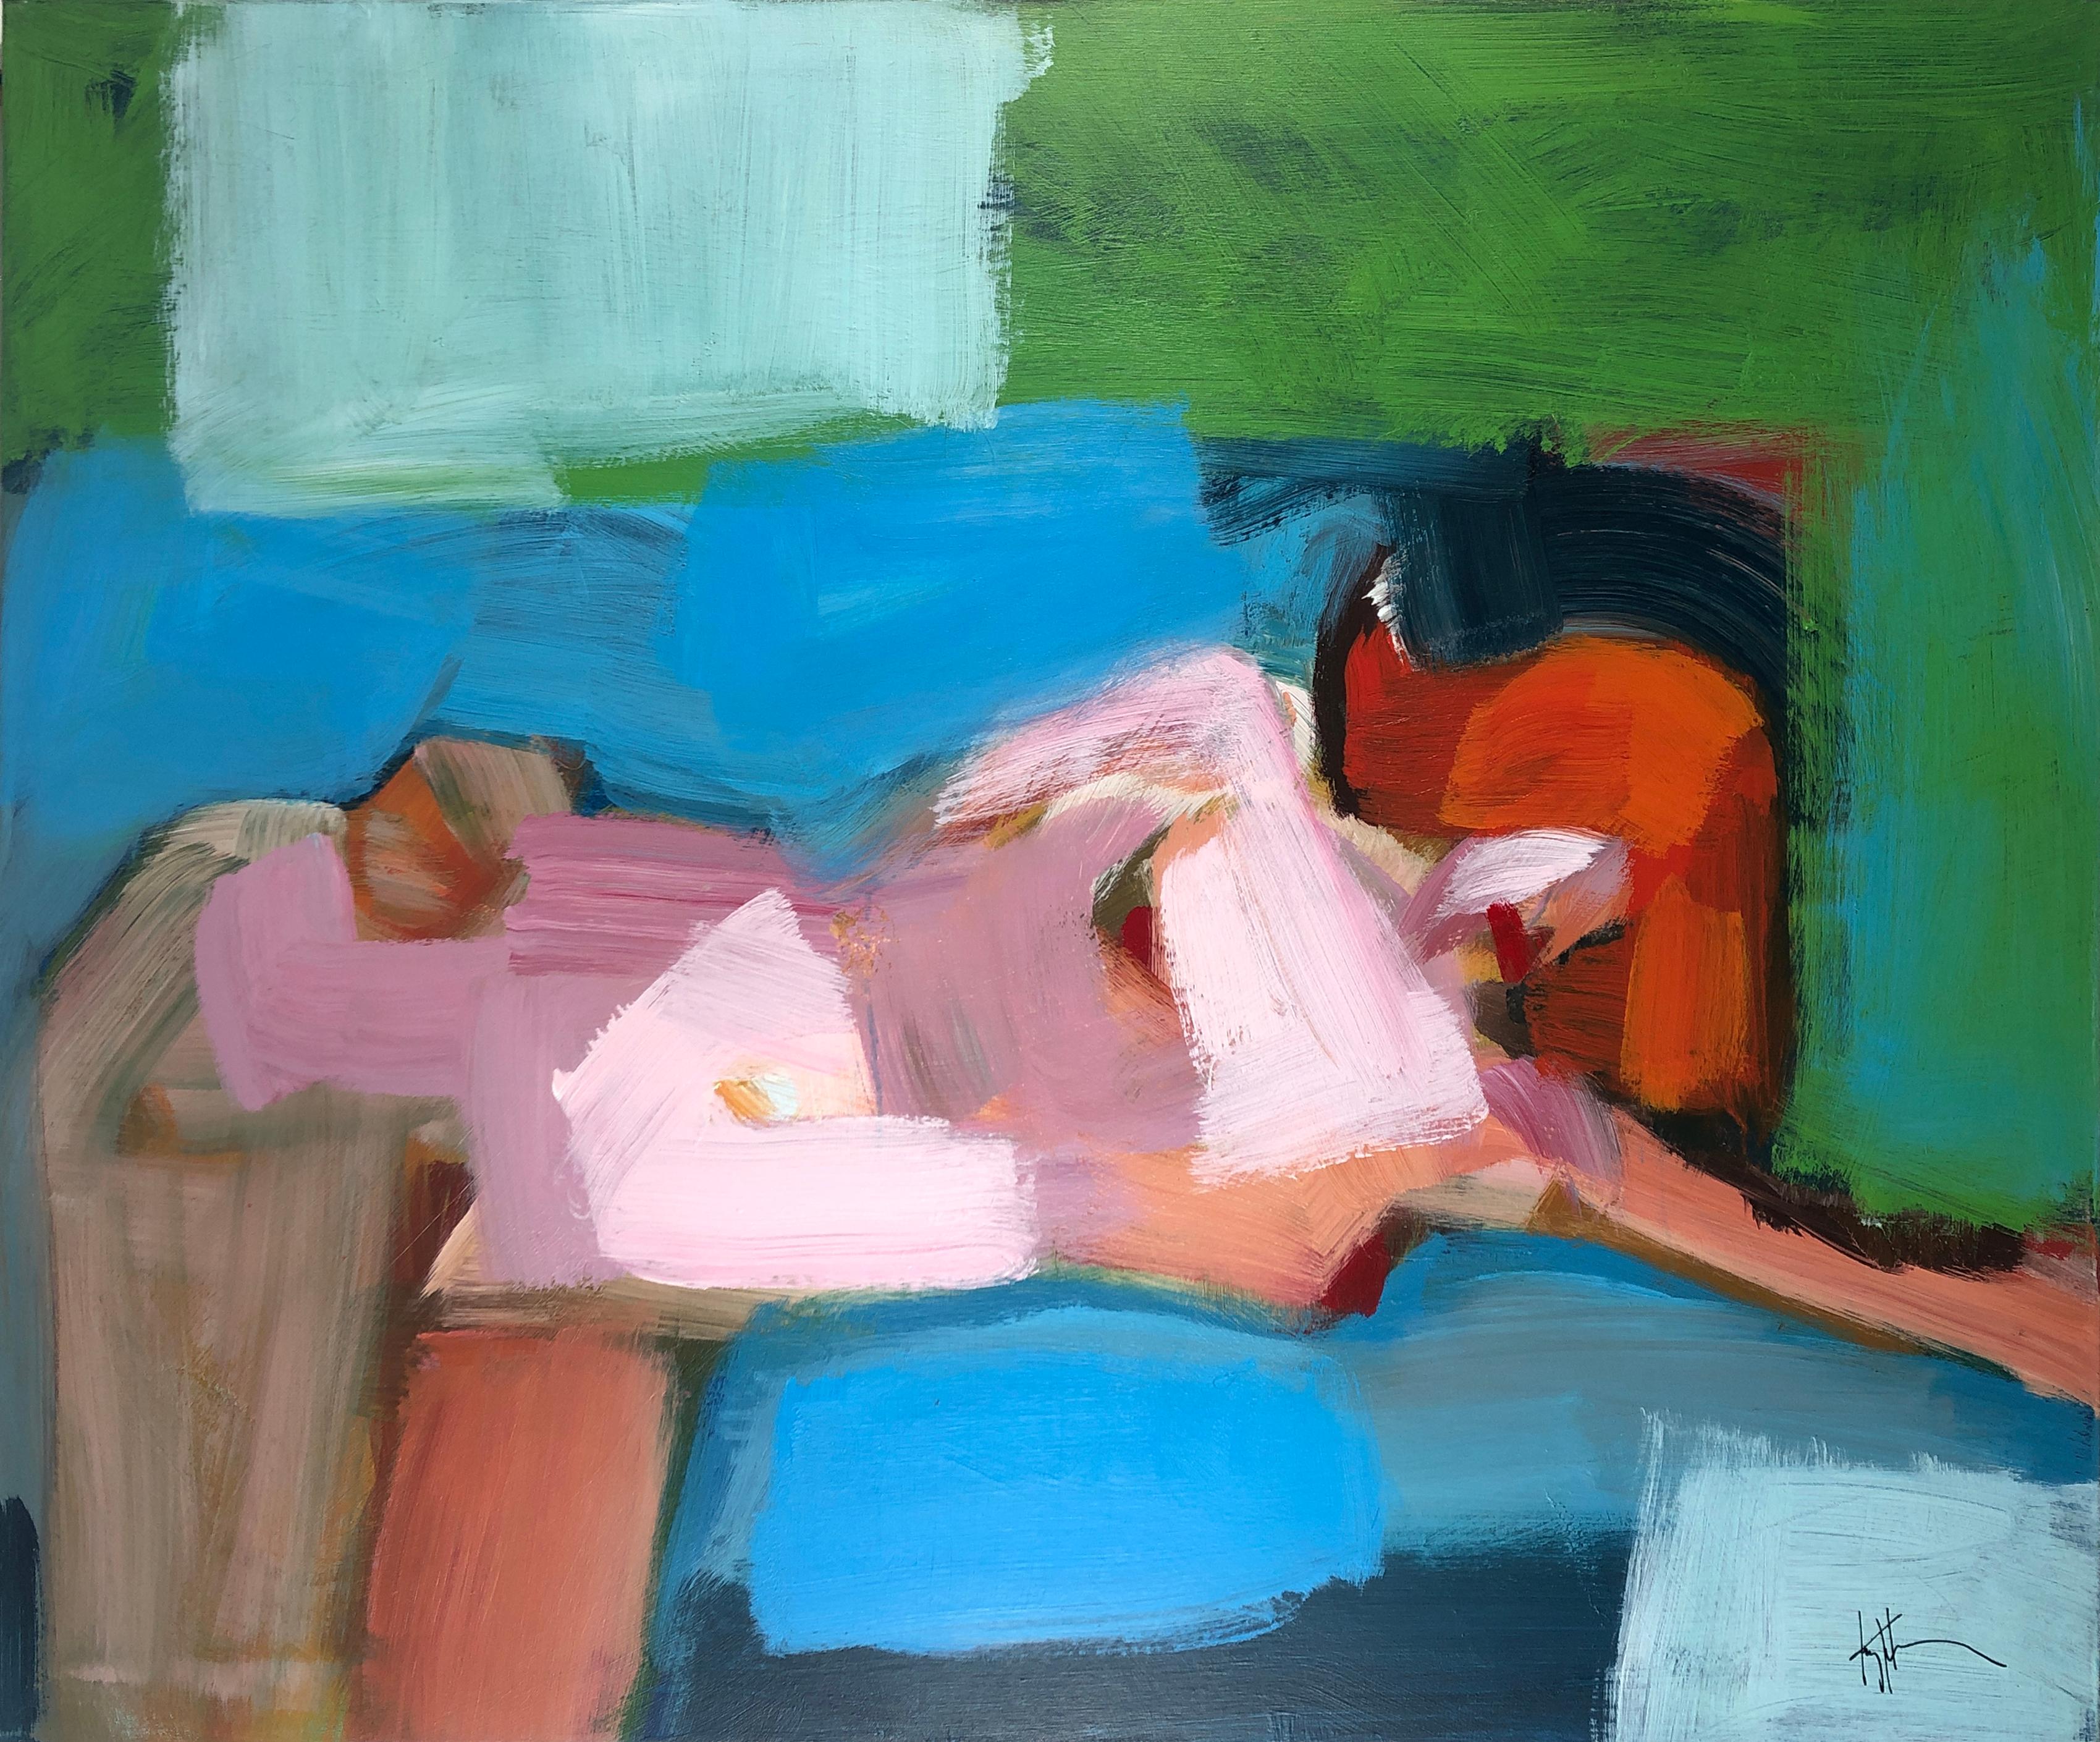 Kerry Horne Abstract Painting - Here and There - 21st Century, Contemporary, Abstract vs Figurative, Acrylic 